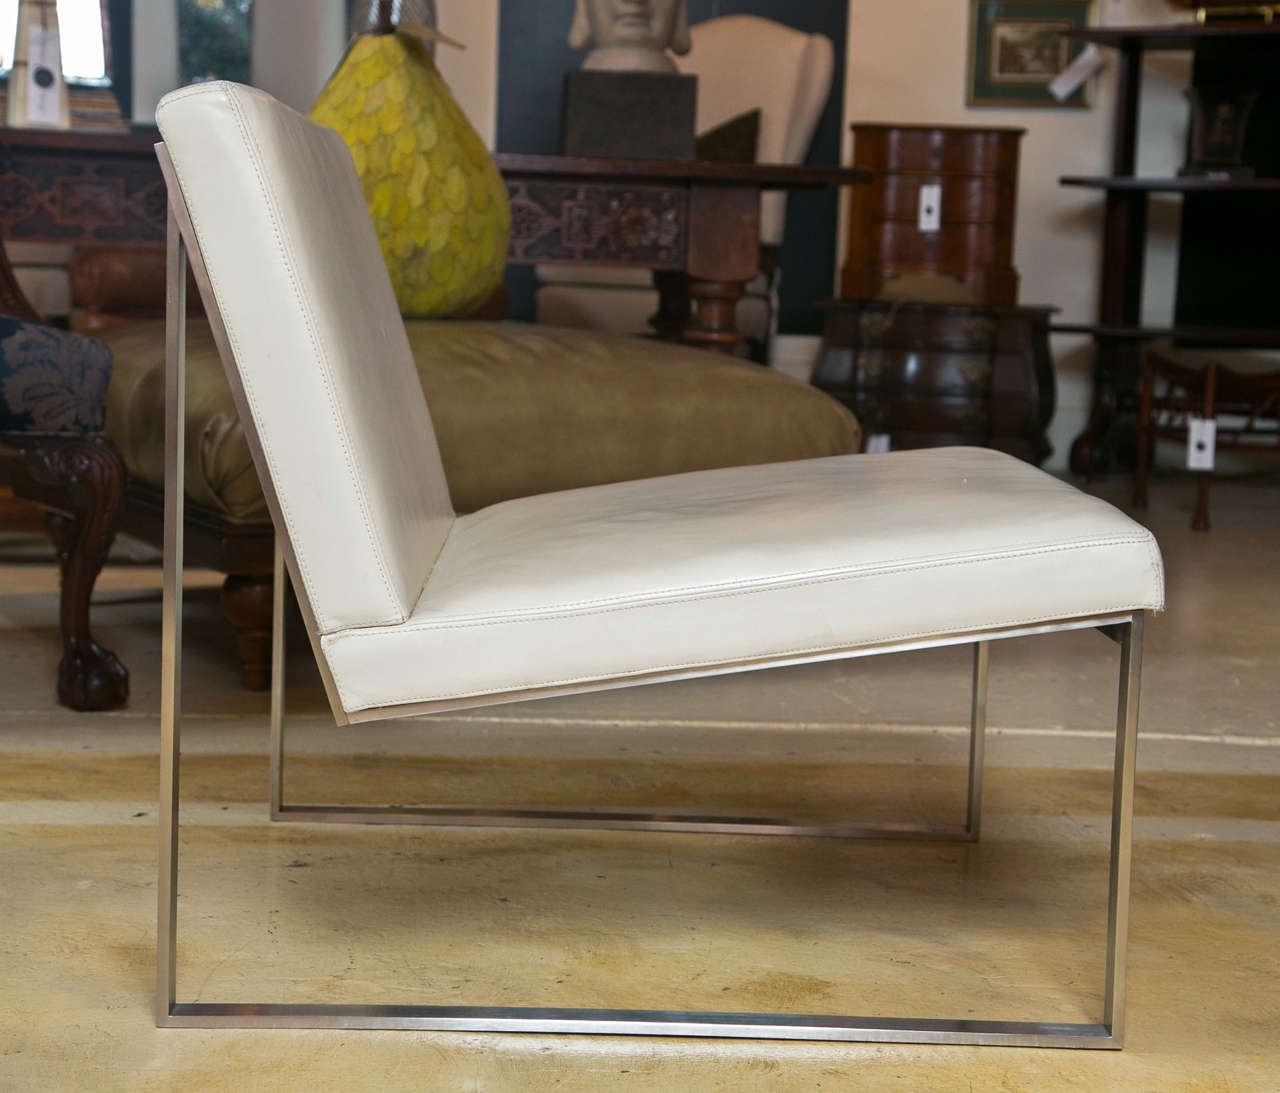 Pair of Milo Baughman style slipper chairs.  Flat bar steel and leather.  great pair of sleek polished steel an white leather chairs.  Soft leather in beautiful condition.